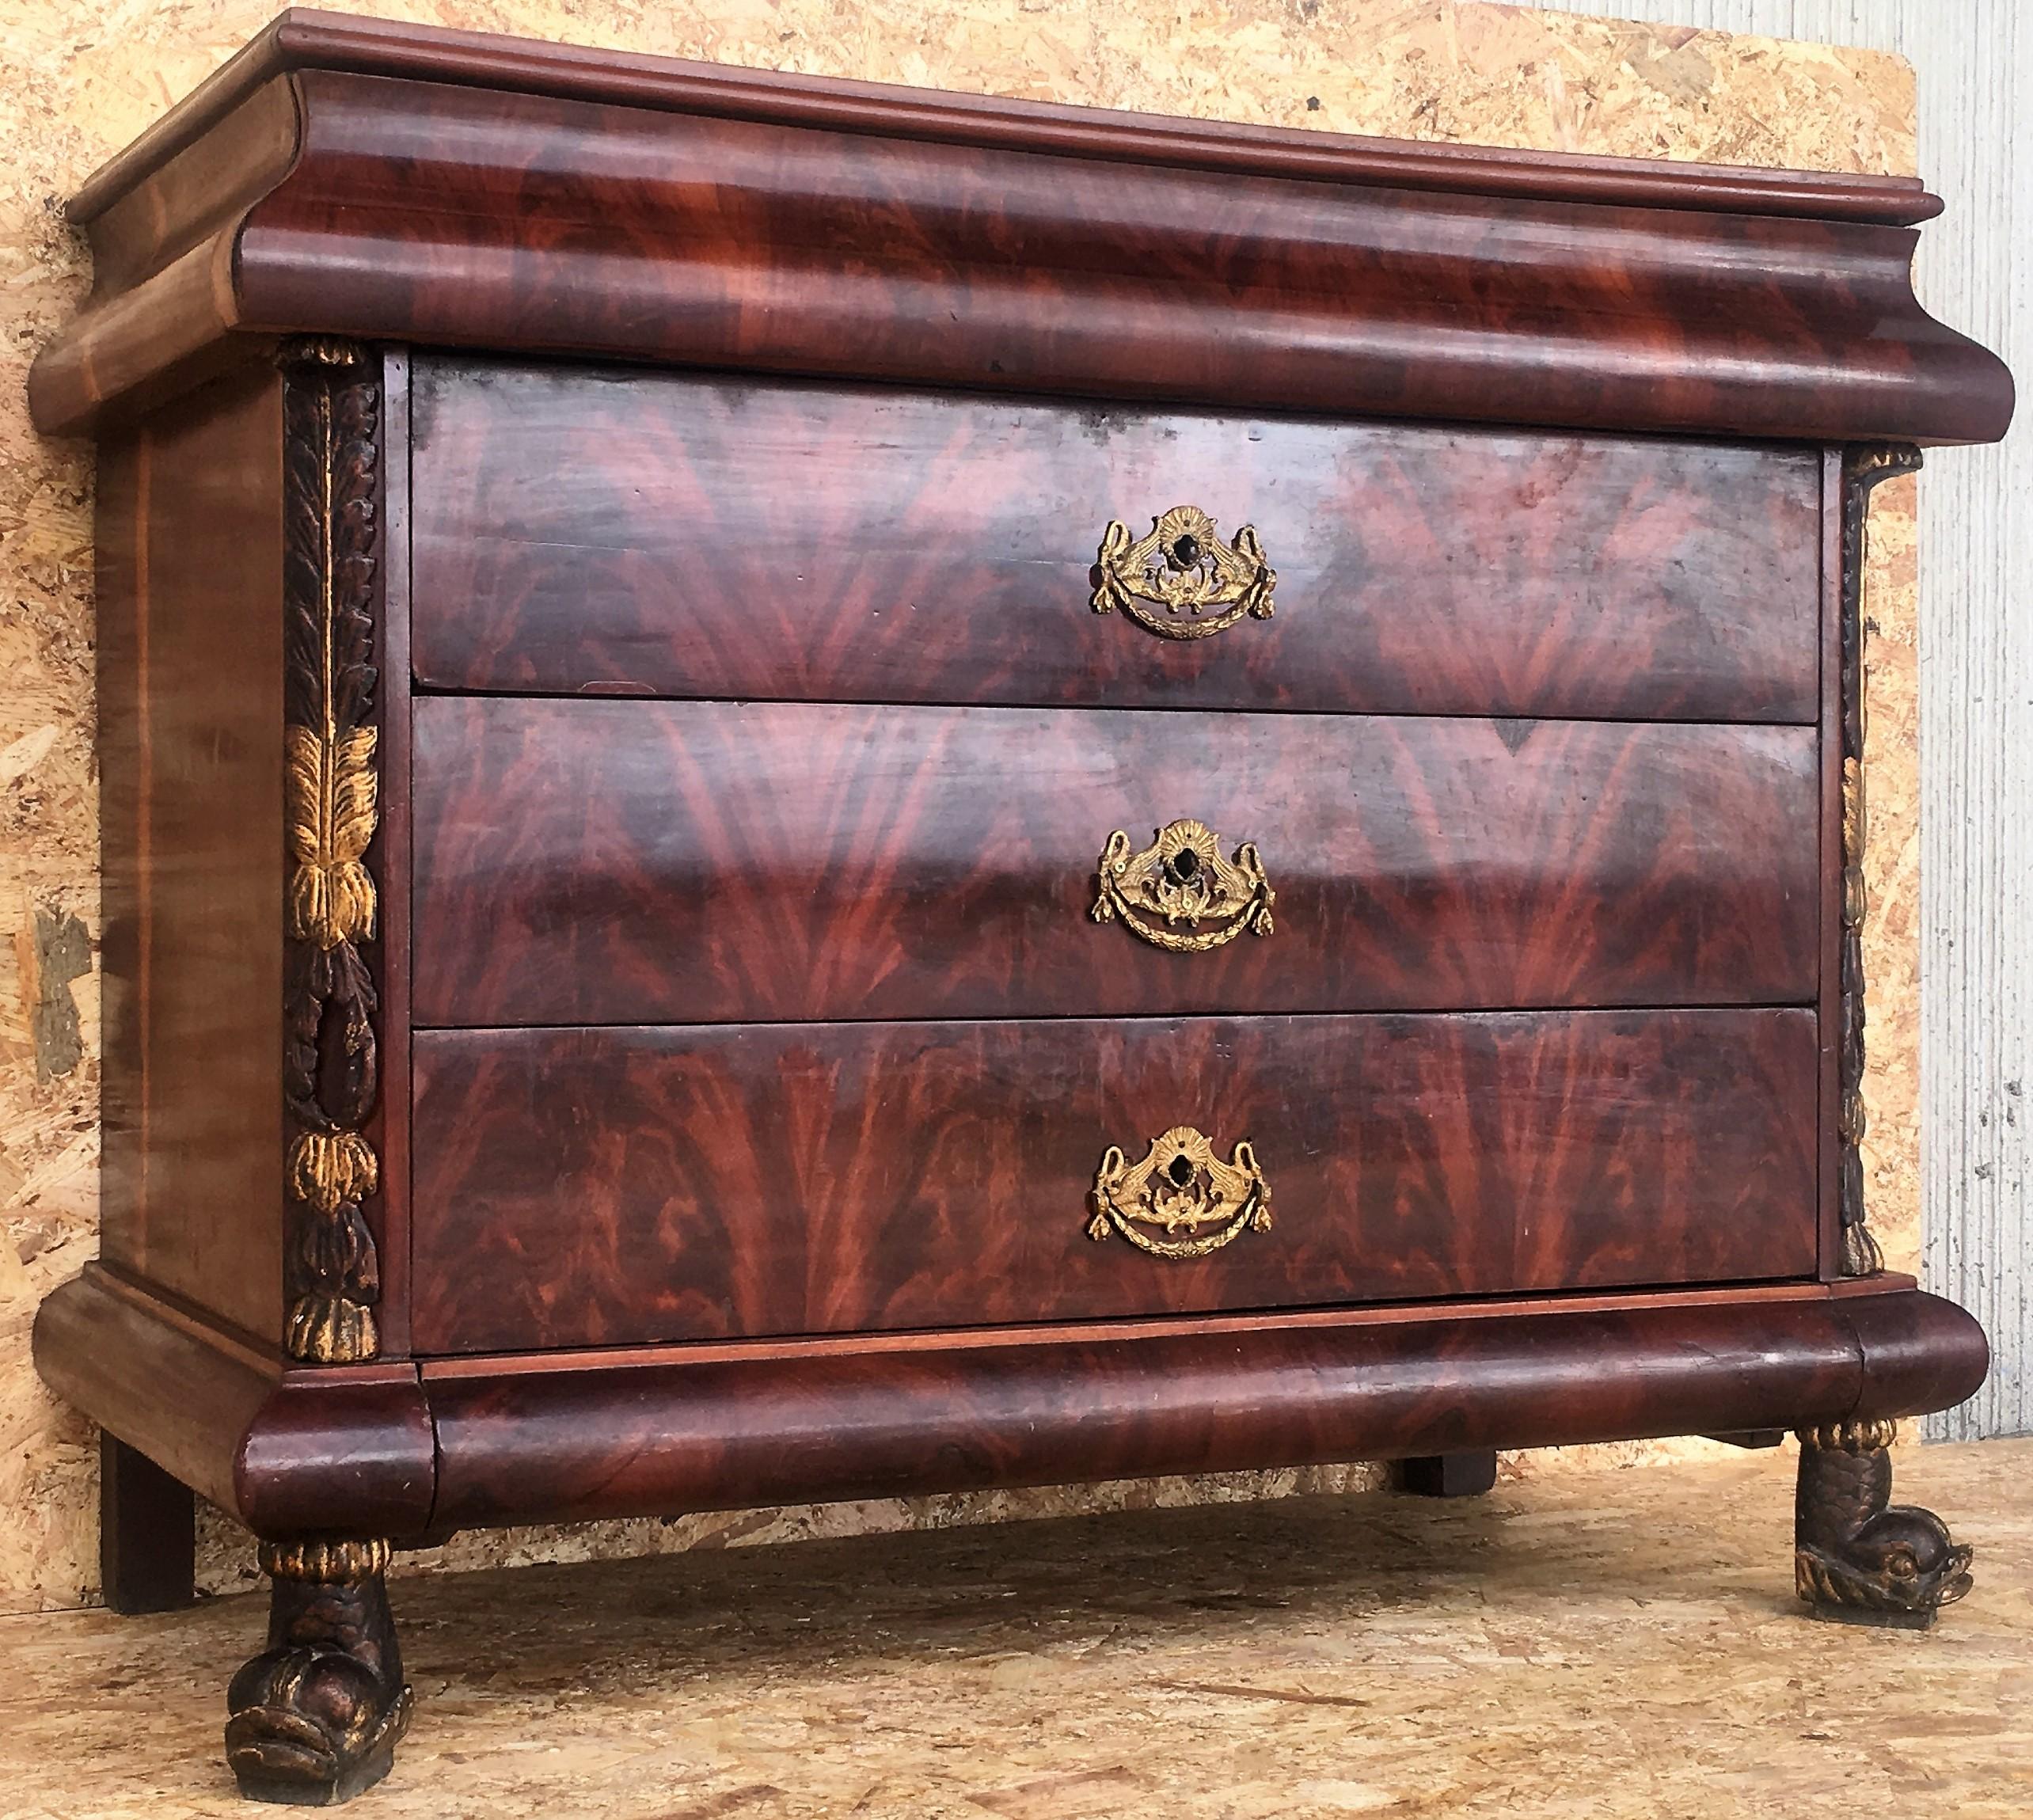 1830s French Empire Mahogany Chest with Four Drawers and Gilded Edges, Commode In Good Condition For Sale In Miami, FL